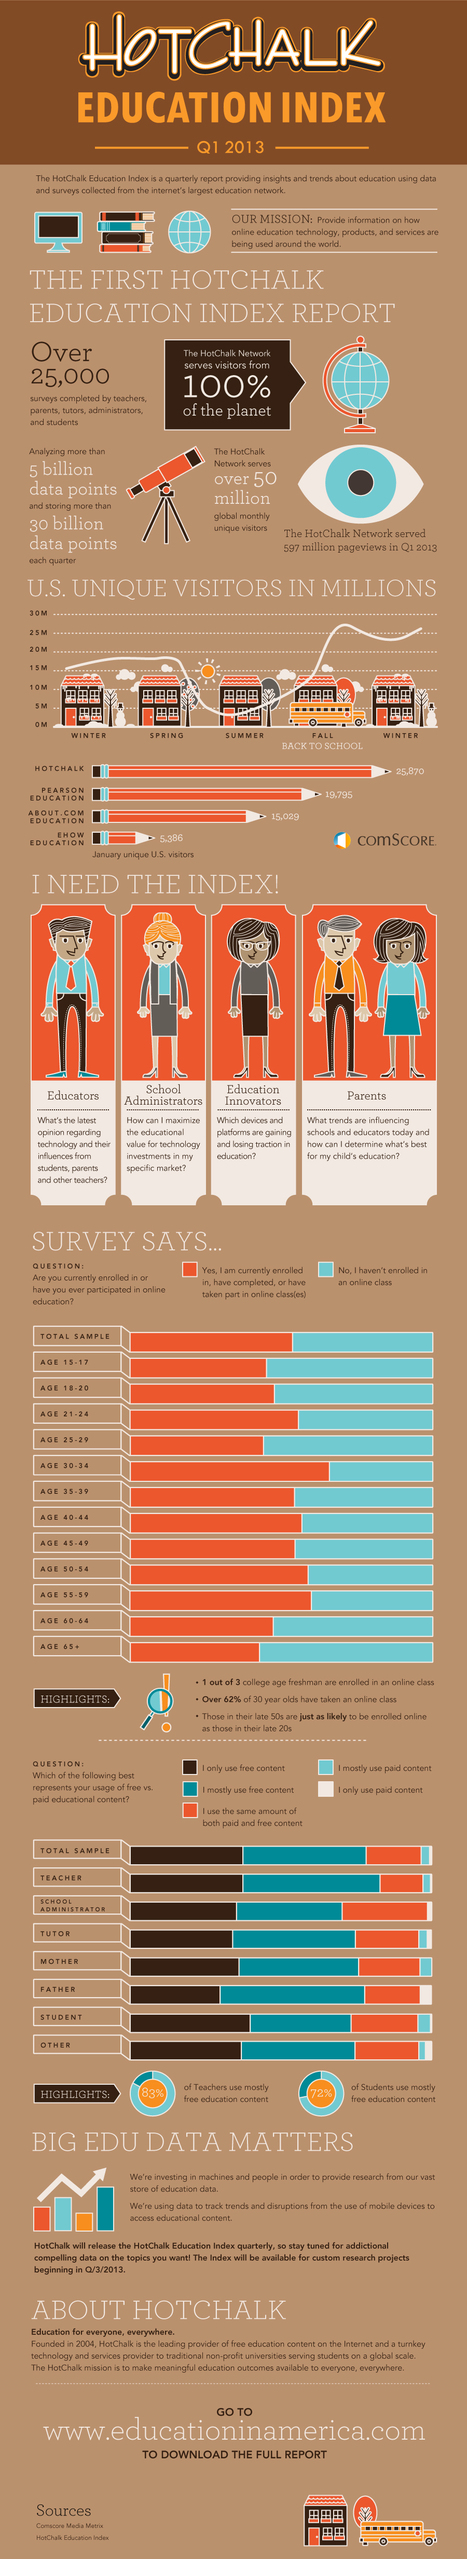 New Survey Uncovers Big Trends In Online Learning [Infographic] | 21st Century Learning and Teaching | Scoop.it